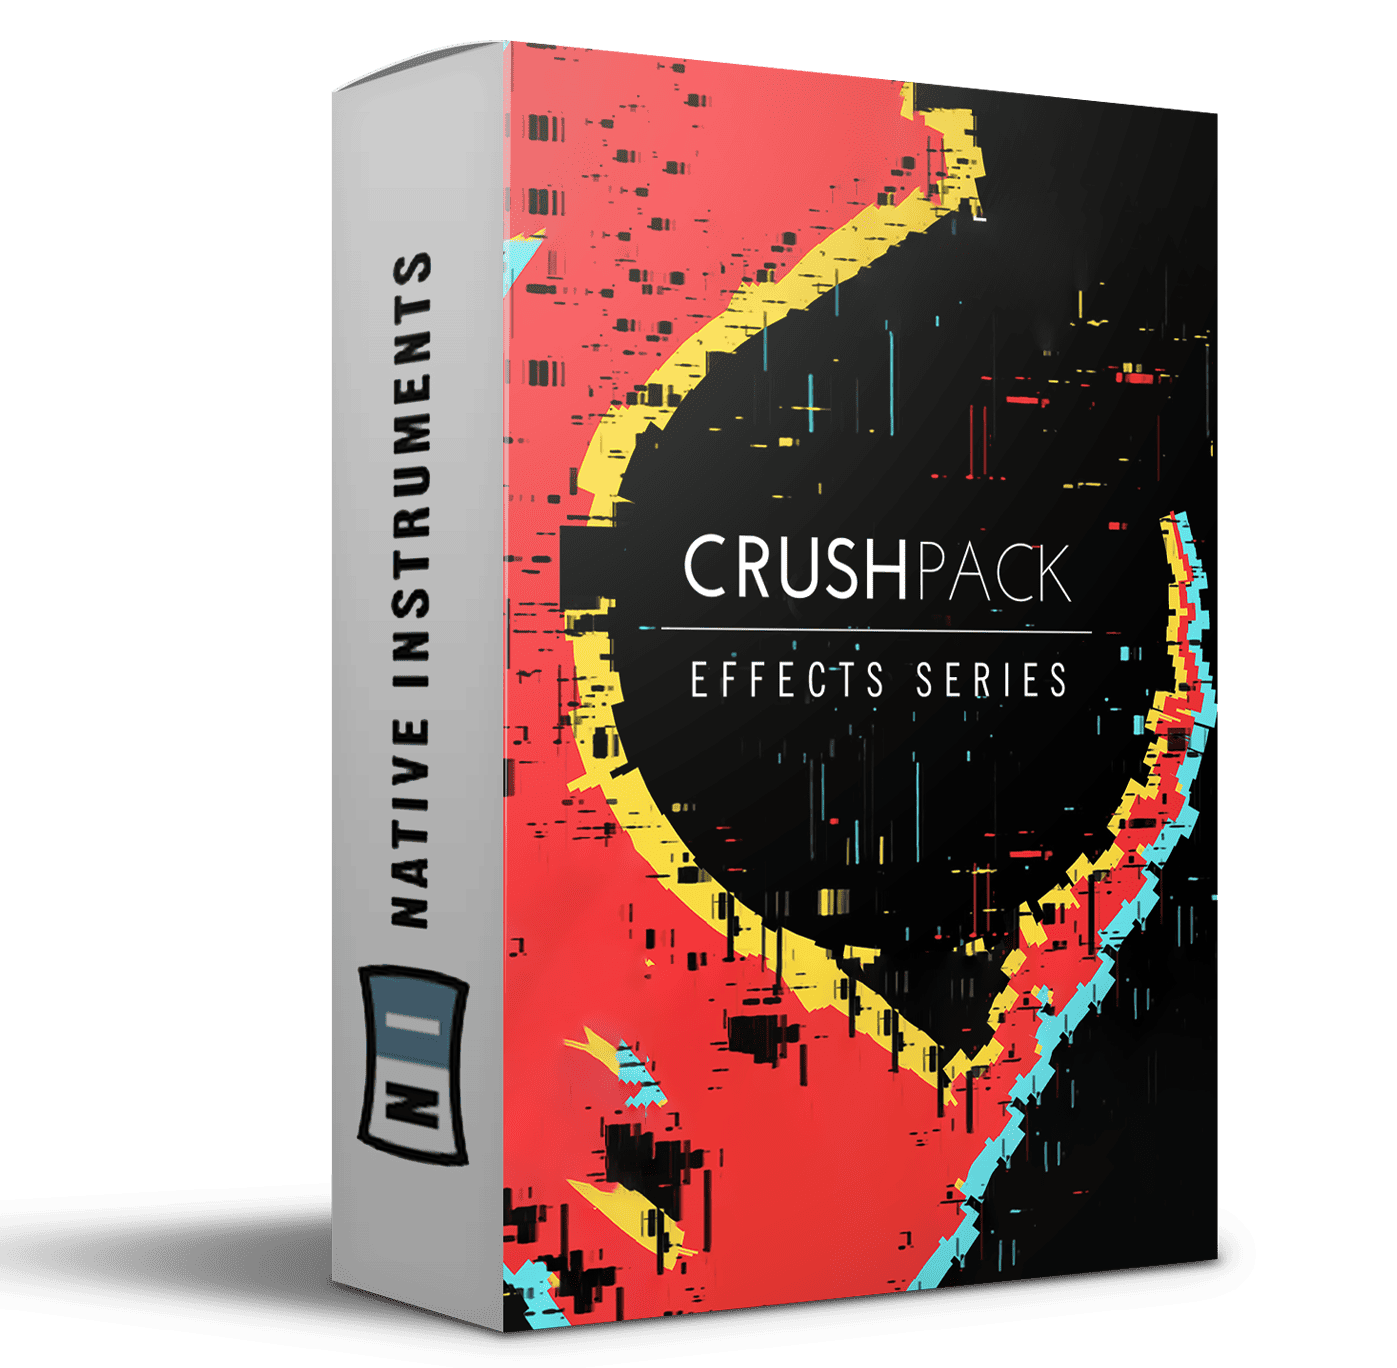 Native Instruments Effects Series Crush Pack 1.3.1 download the last version for ipod